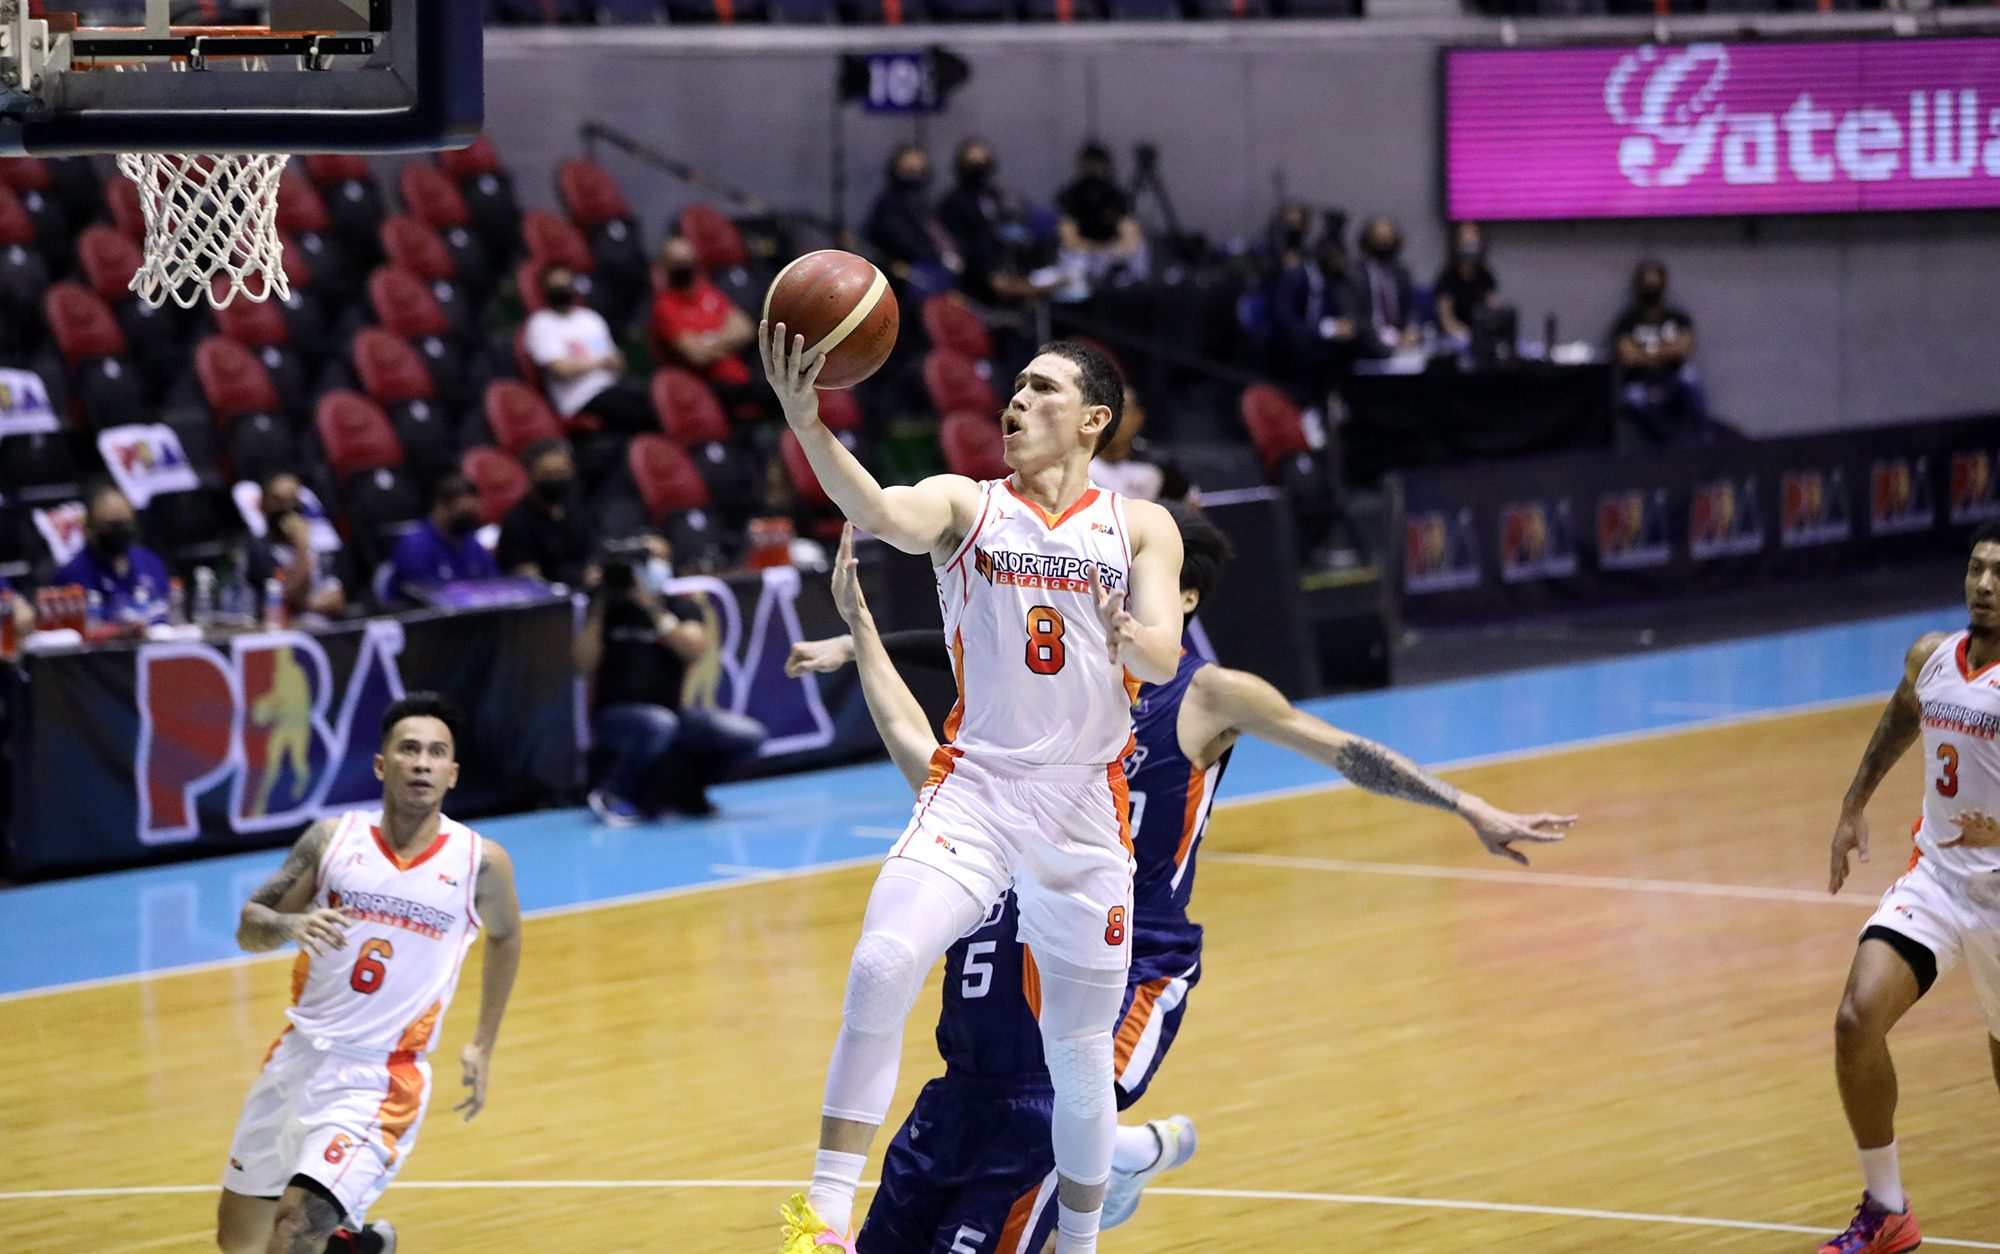 Bolick shines as NorthPort stuns Meralco for 1st win in Governors’ Cup